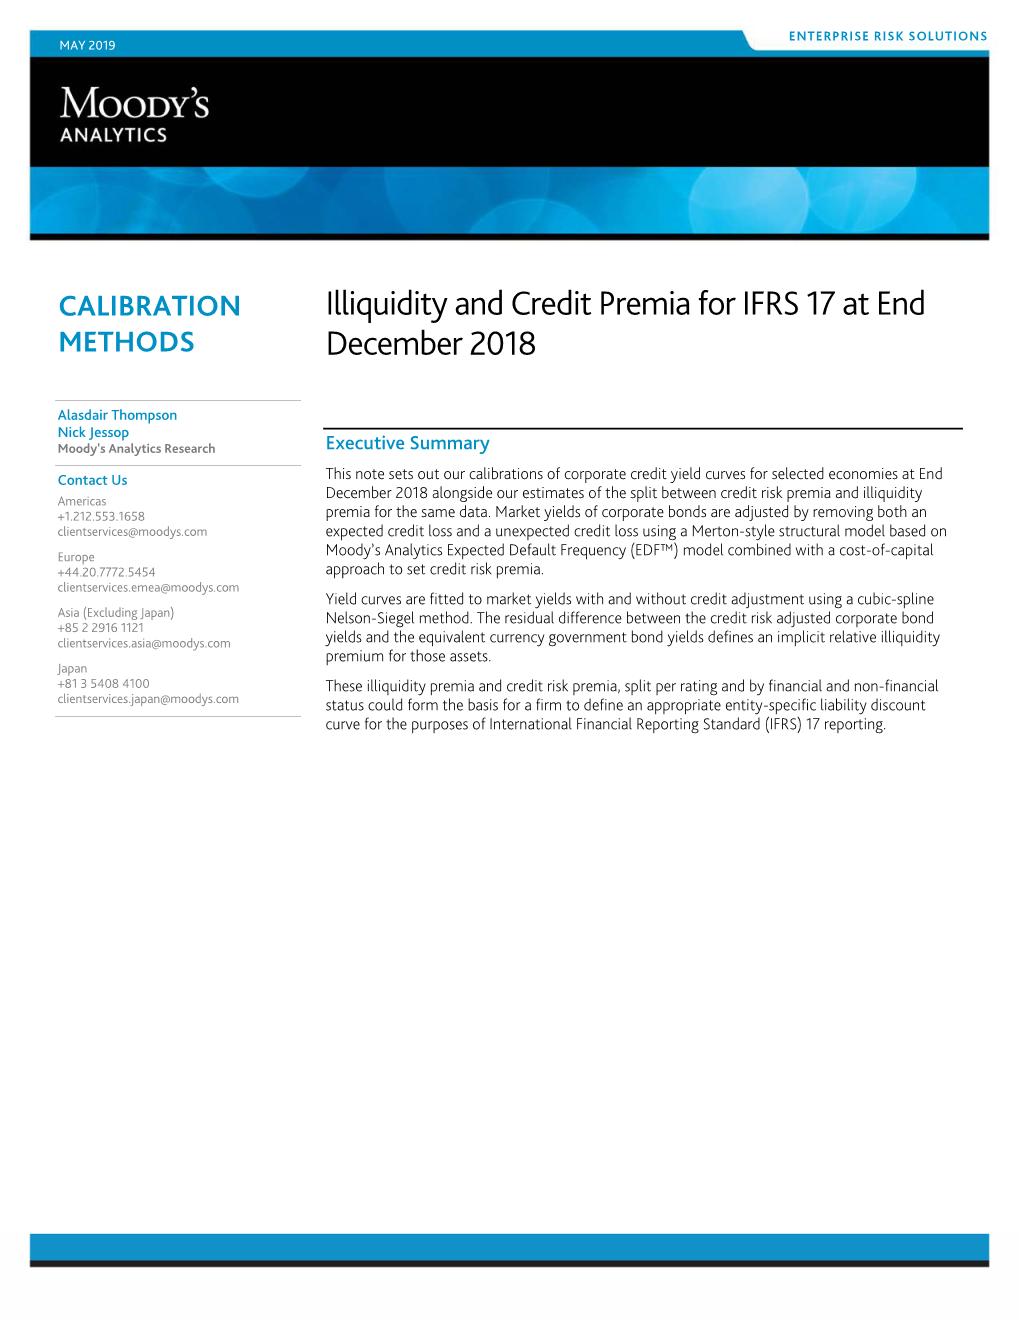 Illiquidity and Credit Premia for IFRS 17 at End